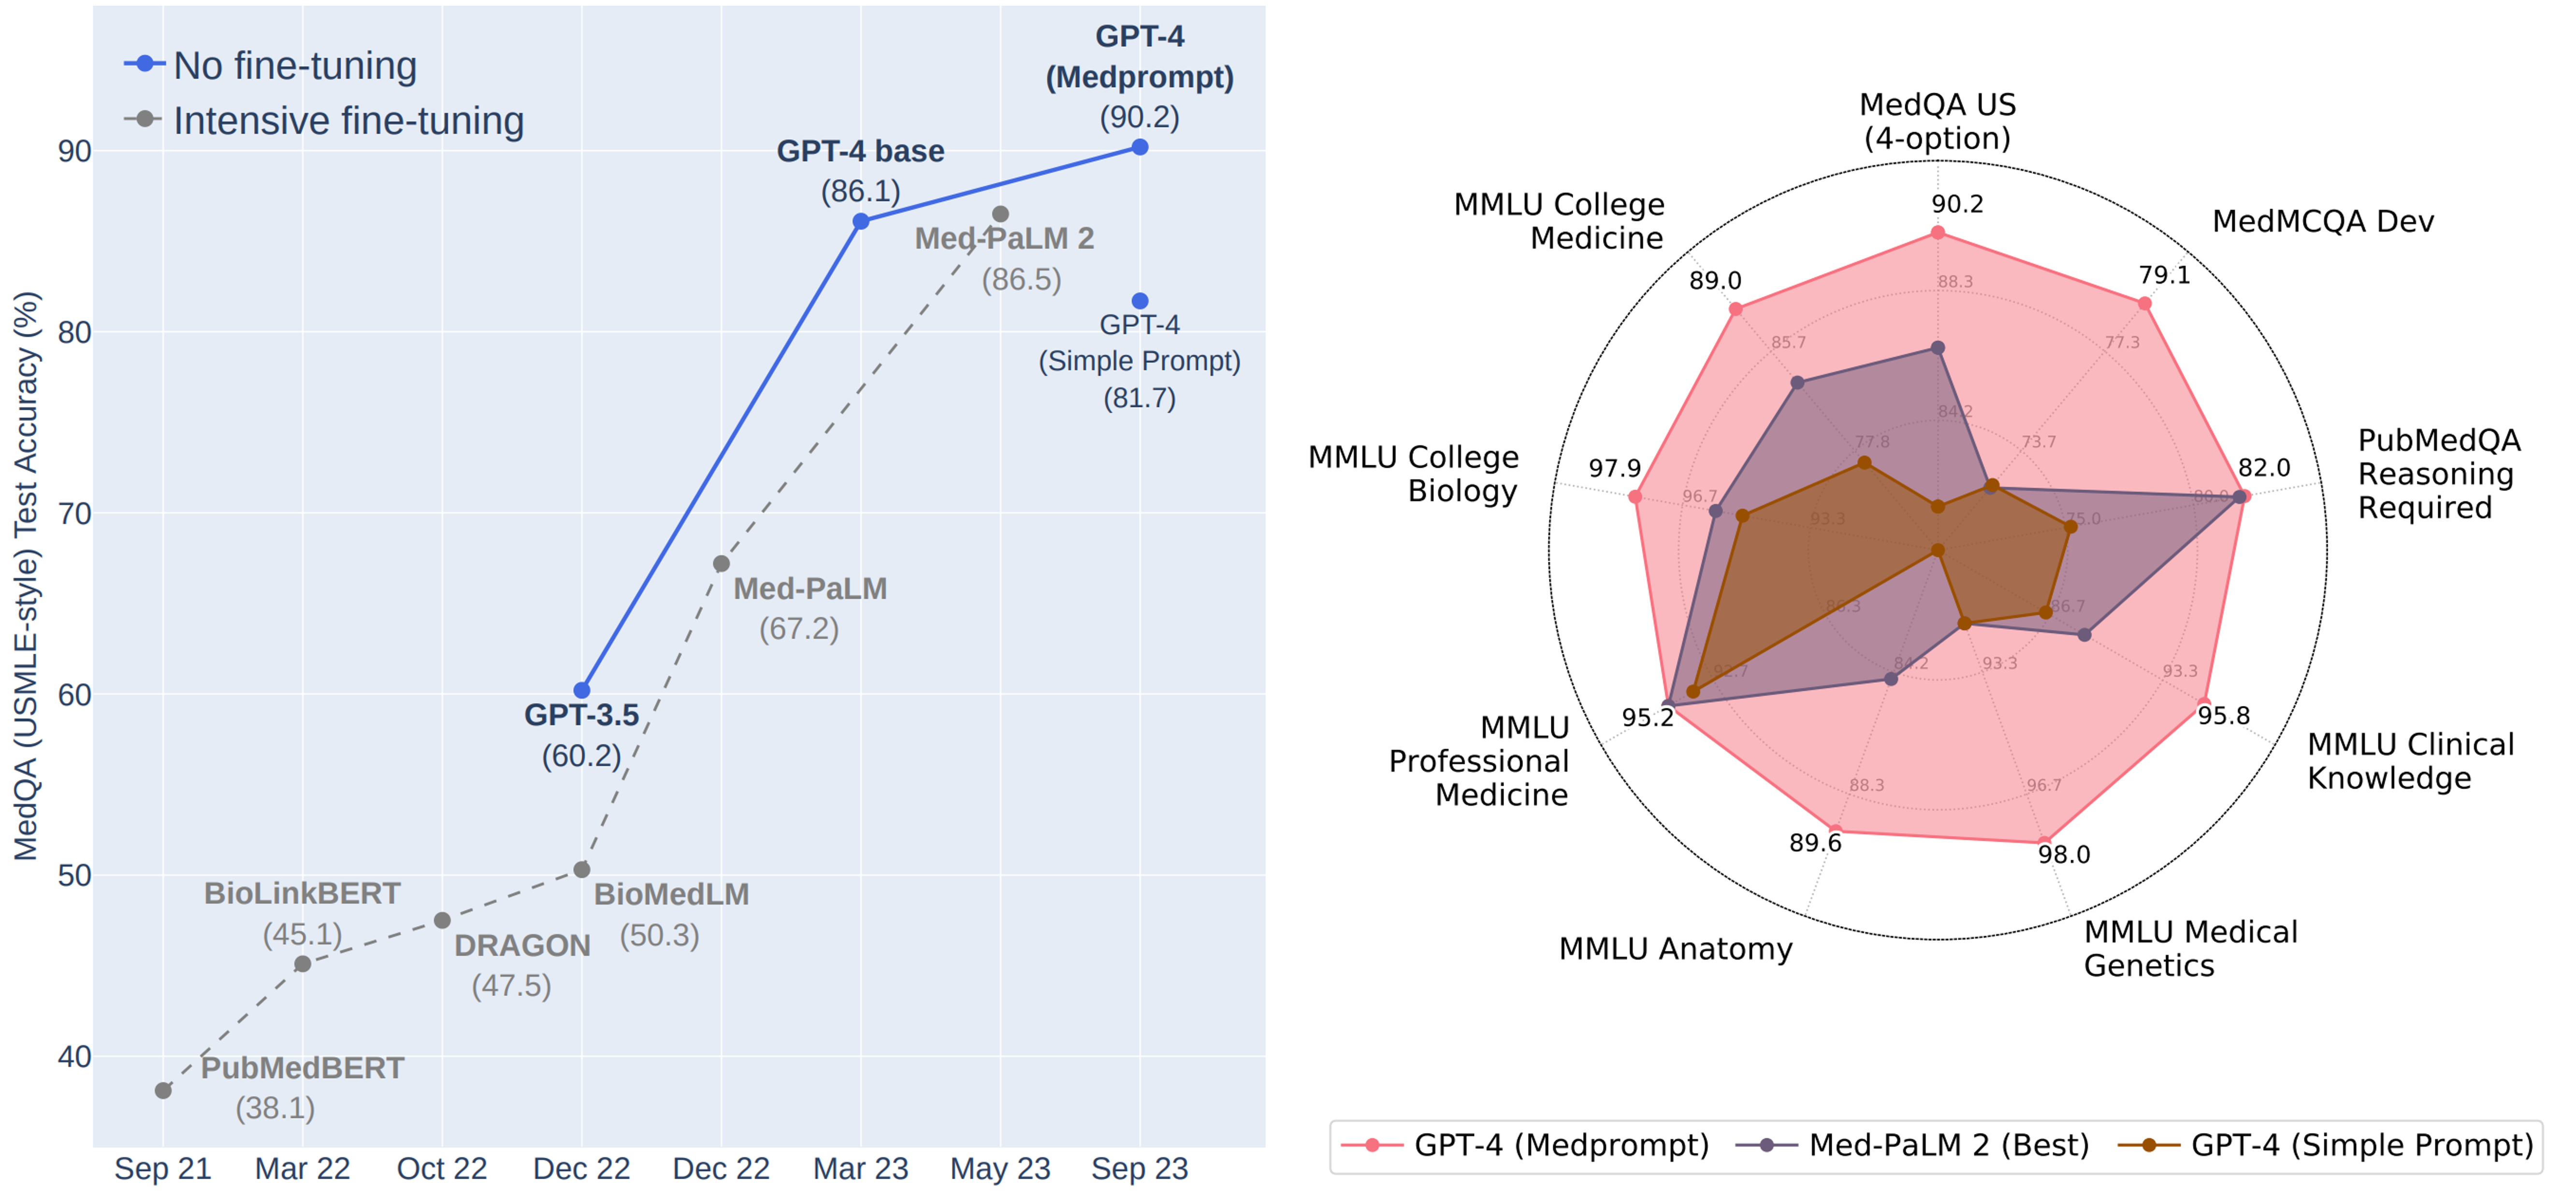 Two charts. The chart on the left compares the performance of models using no fine-tuning or intensive fine-tuning on the MedQA benchmark. GPT-4 (Medprompt) achieves the highest result at 90.2 using no fine-tuning. Med PaLM 2 achieves 86.5 using intensive fine-tuning. These are followed by GPT-4 base at 86.1 (no fine-tuning), GPT-4 (Simple Prompt) at 81.7 (no fine-tuning), Med PaLM at 67.2 (intensive fine-tuning), GPT-3.5 base at 60.2 (no fine-tuning), BioMedLM at 50.3 (intensive fine-tuning), DRAGON at 47.5 (intensive fine-tuning), BioLinkBERT at 45.1 (intensive fine-tuning), and PubMedBERT at 38.1 (intensive fine-tuning). The chart on the right compares GPT-4 (Medprompt), Med PaLM 2, and GPT-4 (Simple Prompt) model performance on medical challenge problems. GPT-4 with MedPrompt achieves state-of-the-art results on MedQA US (4-option), MedMCQA Dev, PubMedQA Reasoning Required, MMLU Clinical Knowledge, MMLU Medical Genetics MMLU Anatomy, MMLU Professional Medicine, MMLU College Biology, and MMLU College Medicine outperforming Med PaLM 2, and GPT-4 (Simple Prompt).